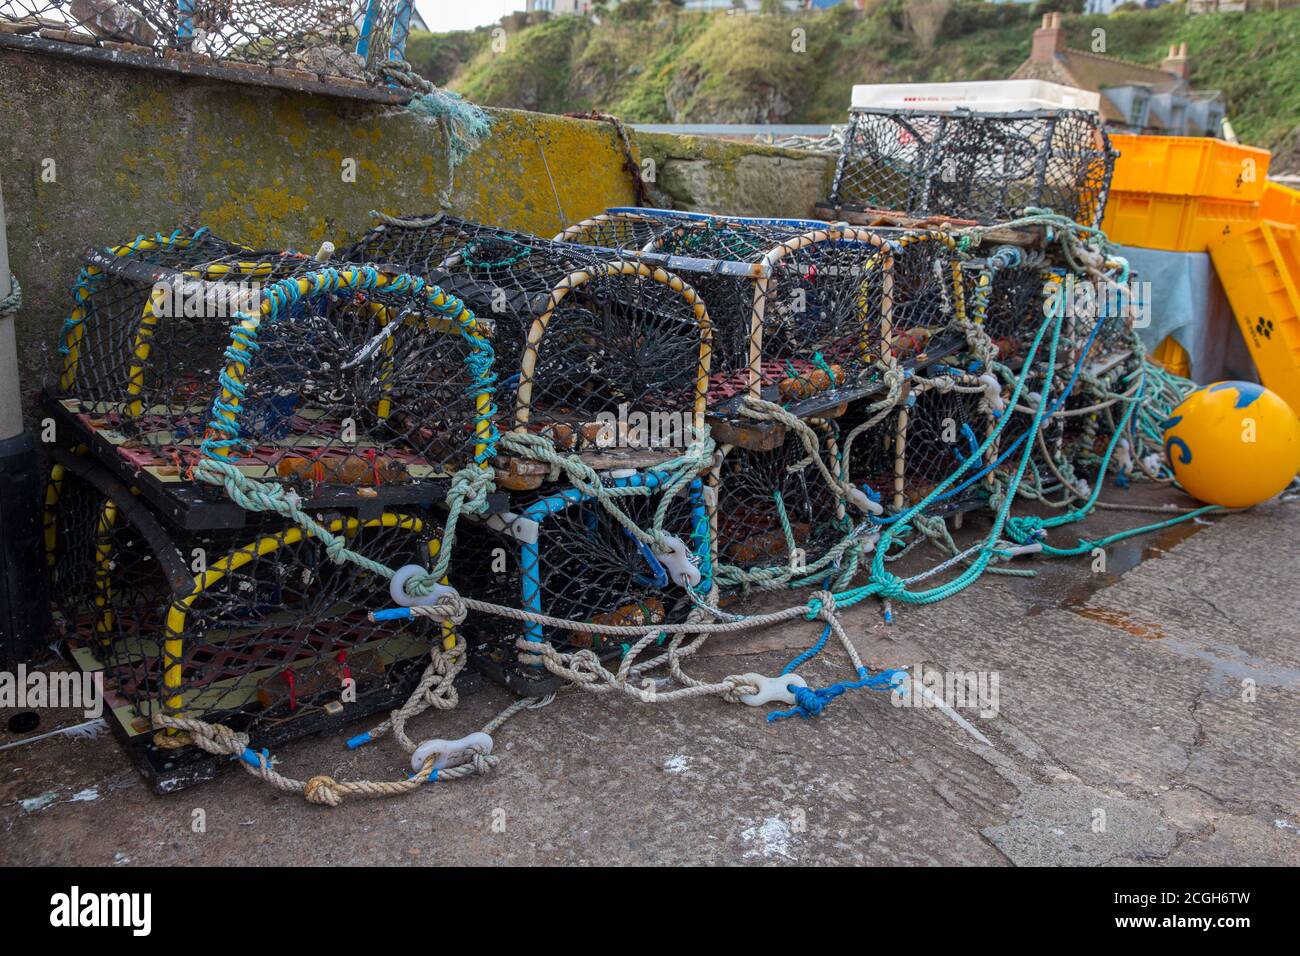 Lobster pots on a quay side waiting to be loaded onto a fishing boat Stock Photo